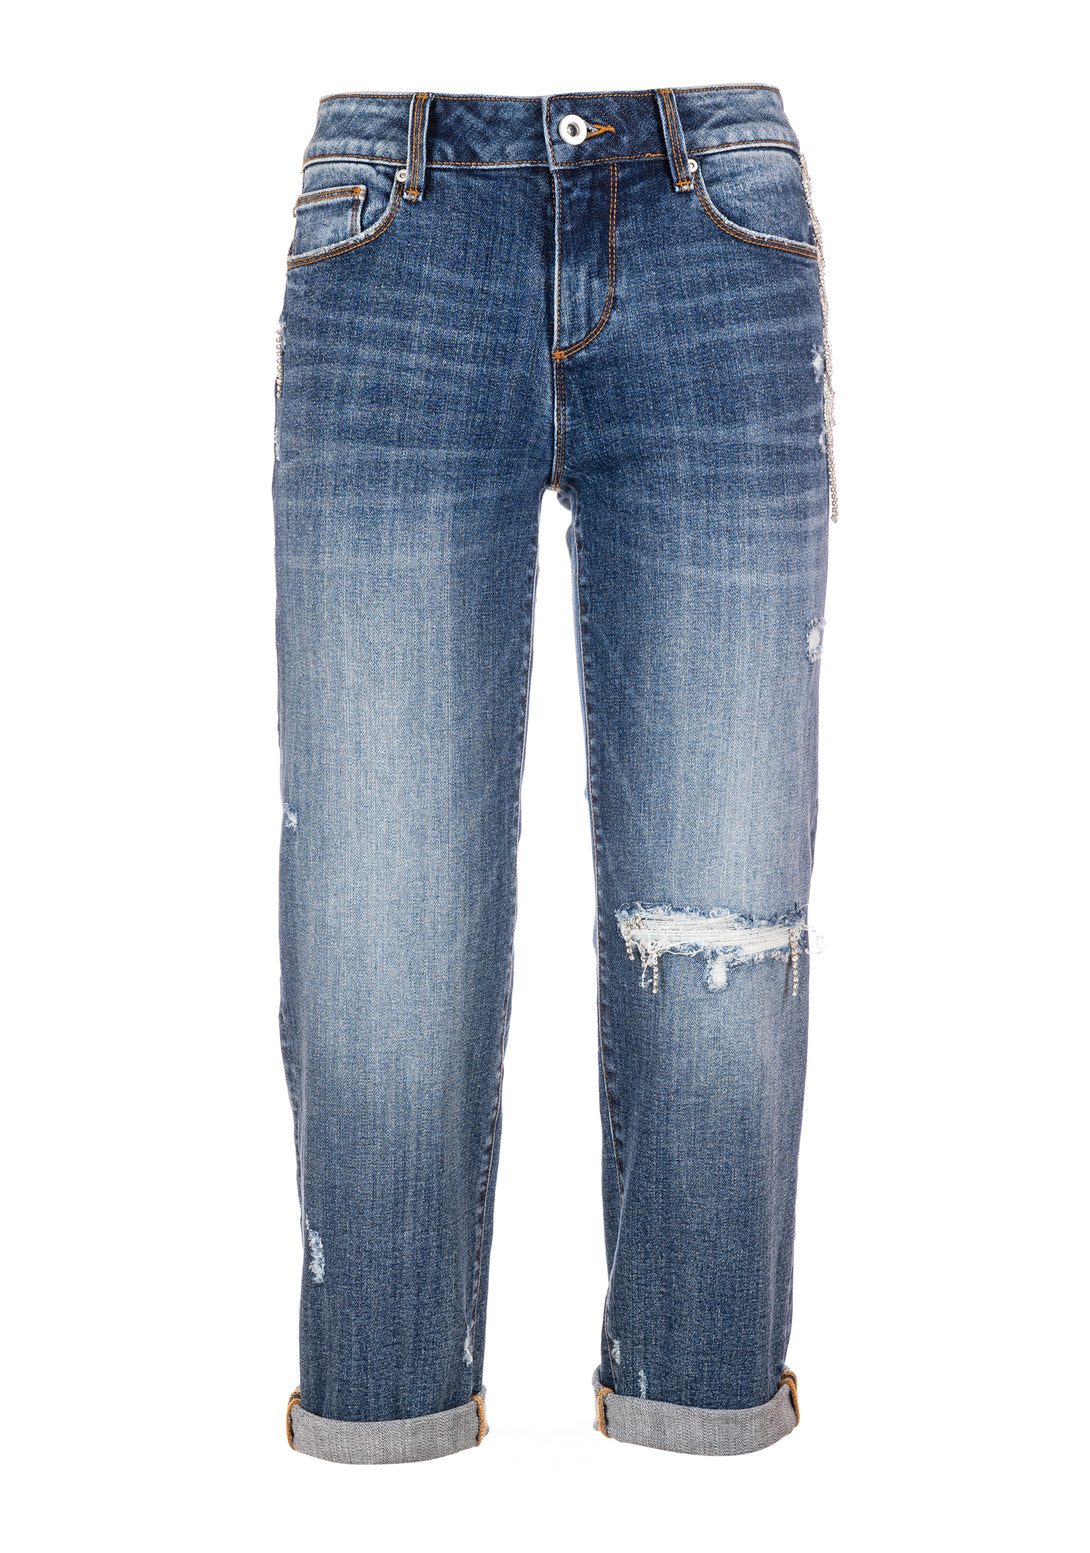 Jeans cropped with push up effect made in denim with middle strong wash